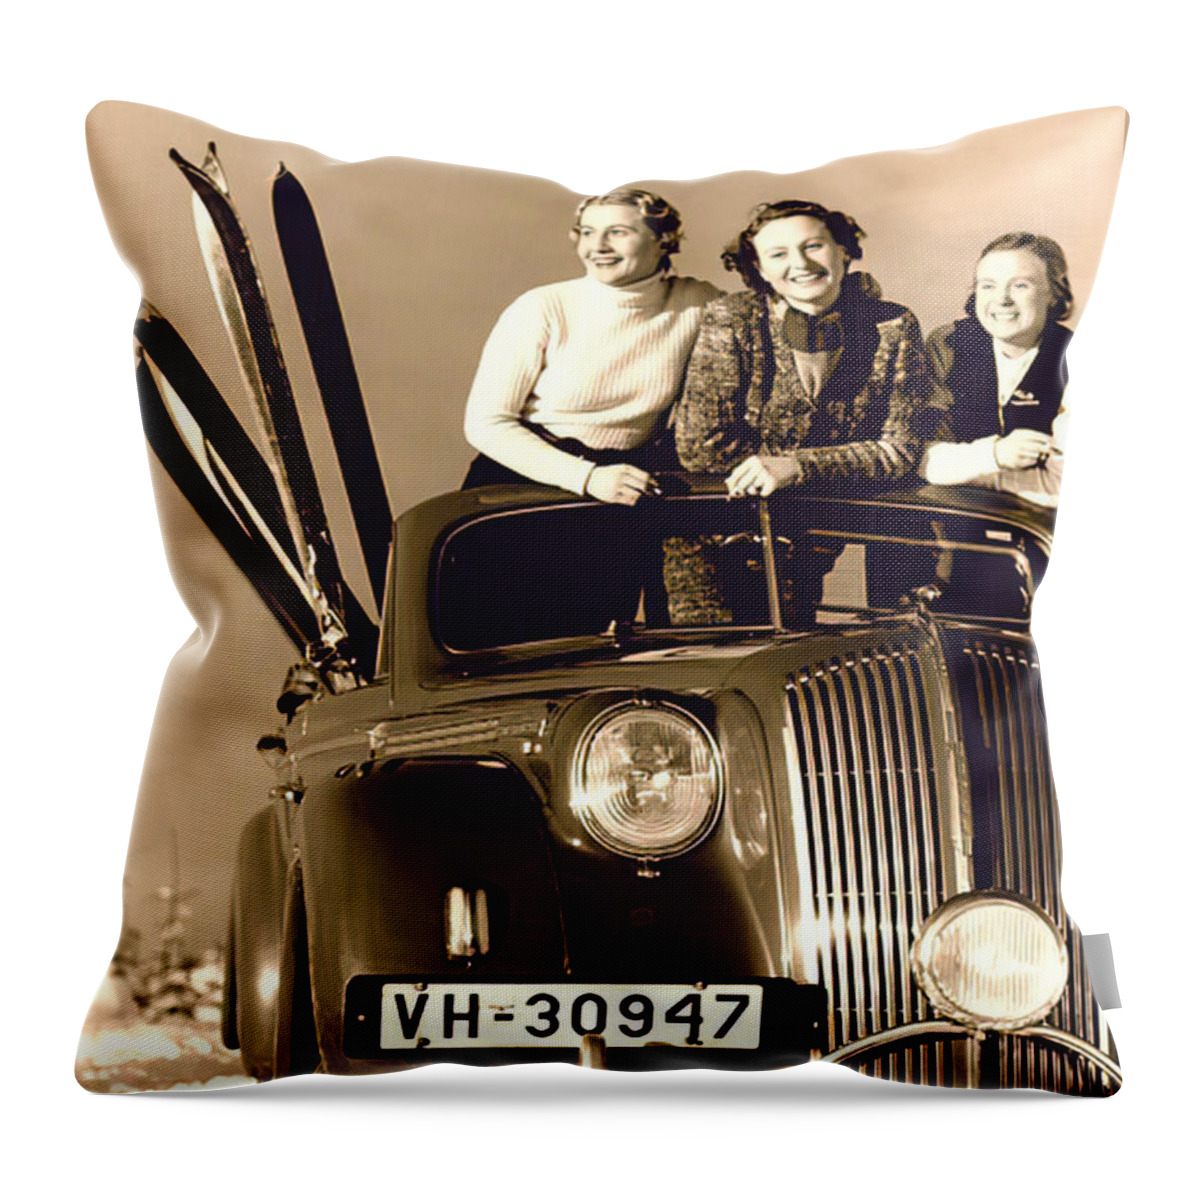 Vintage Throw Pillow featuring the photograph Three Fashion Models With 1940s Vehicle And Skis by Retrographs